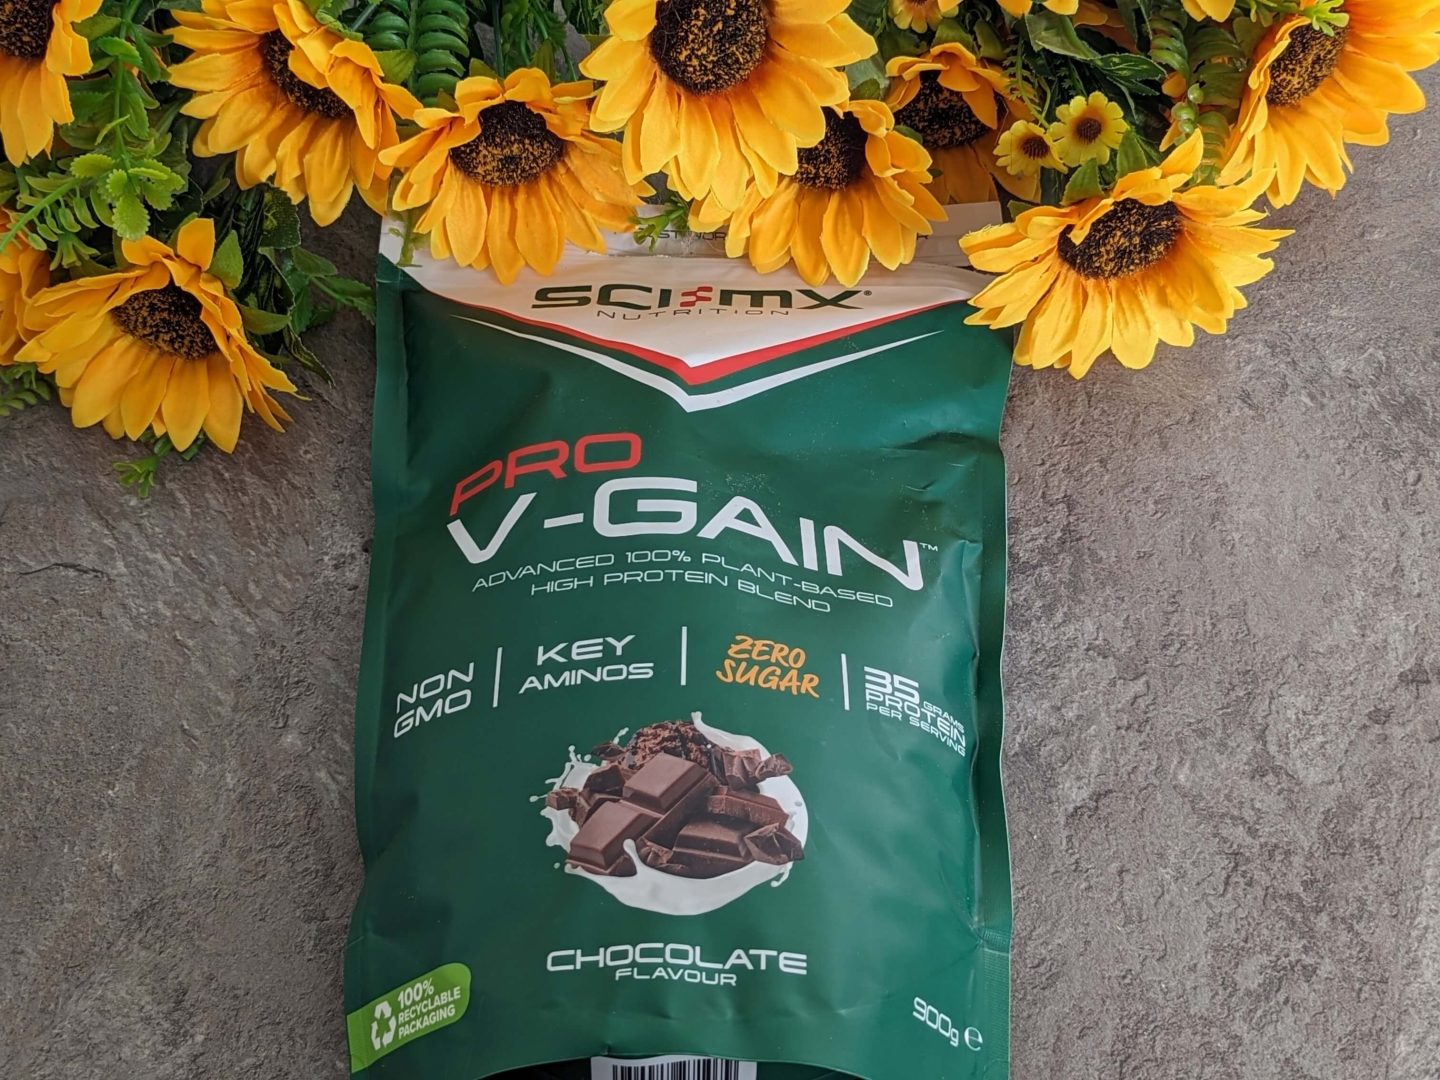 Packet of V-Gain chocolate flavour protein shake displayed against a bunch of sunflowers.